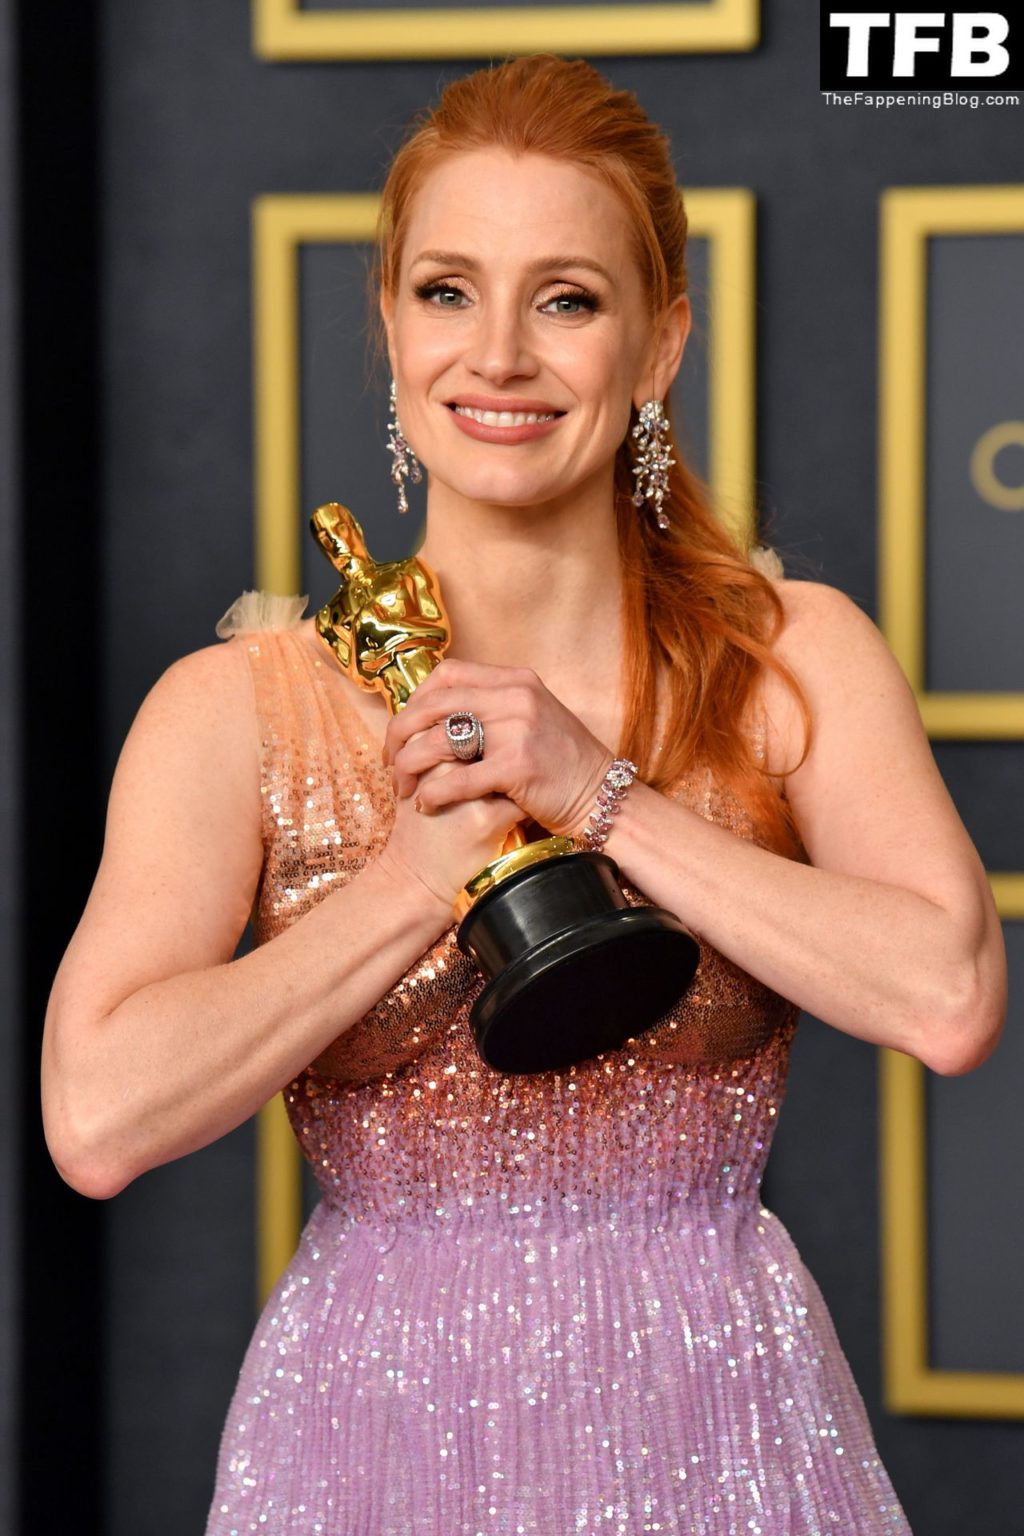 Jessica Chastain Sexy The Fappening Blog 24 1 1024x1536 - Jessica Chastain Poses With Her Oscar at the 94th Academy Awards (150 Photos)